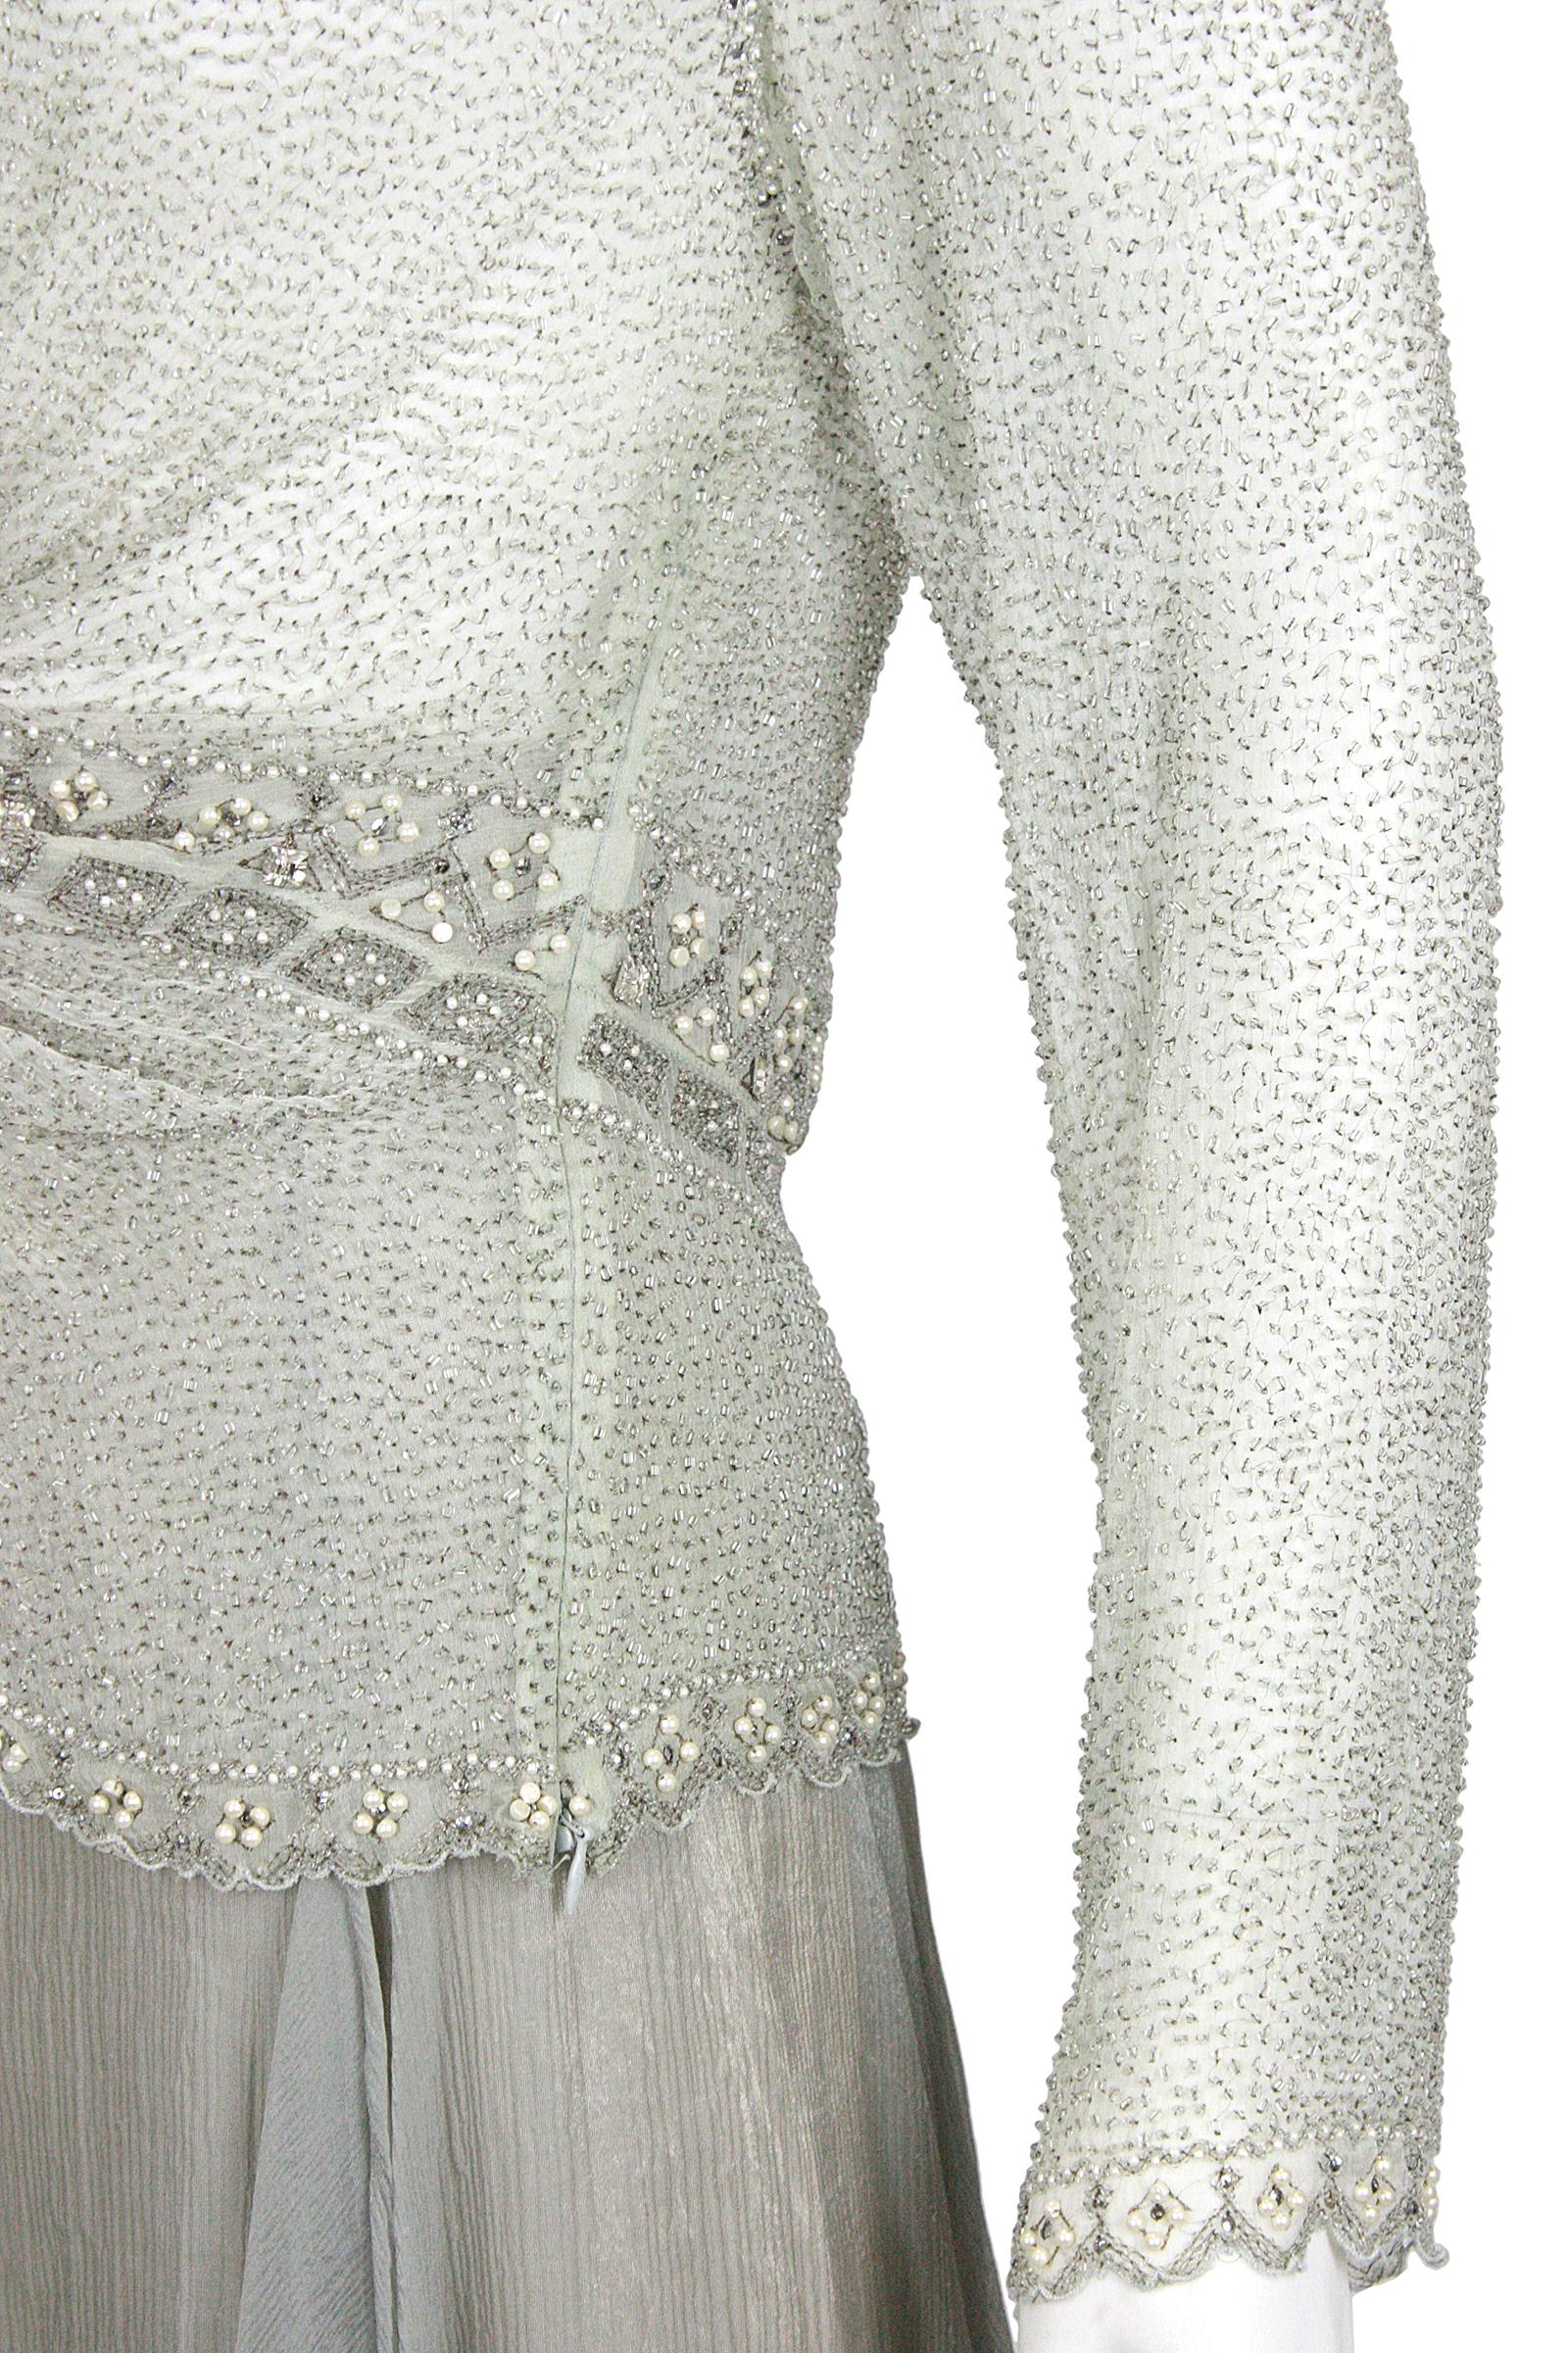 Eavis & Brown London Seafoam Chiffon Beaded Top and Long Silver Skirt  For Sale 1